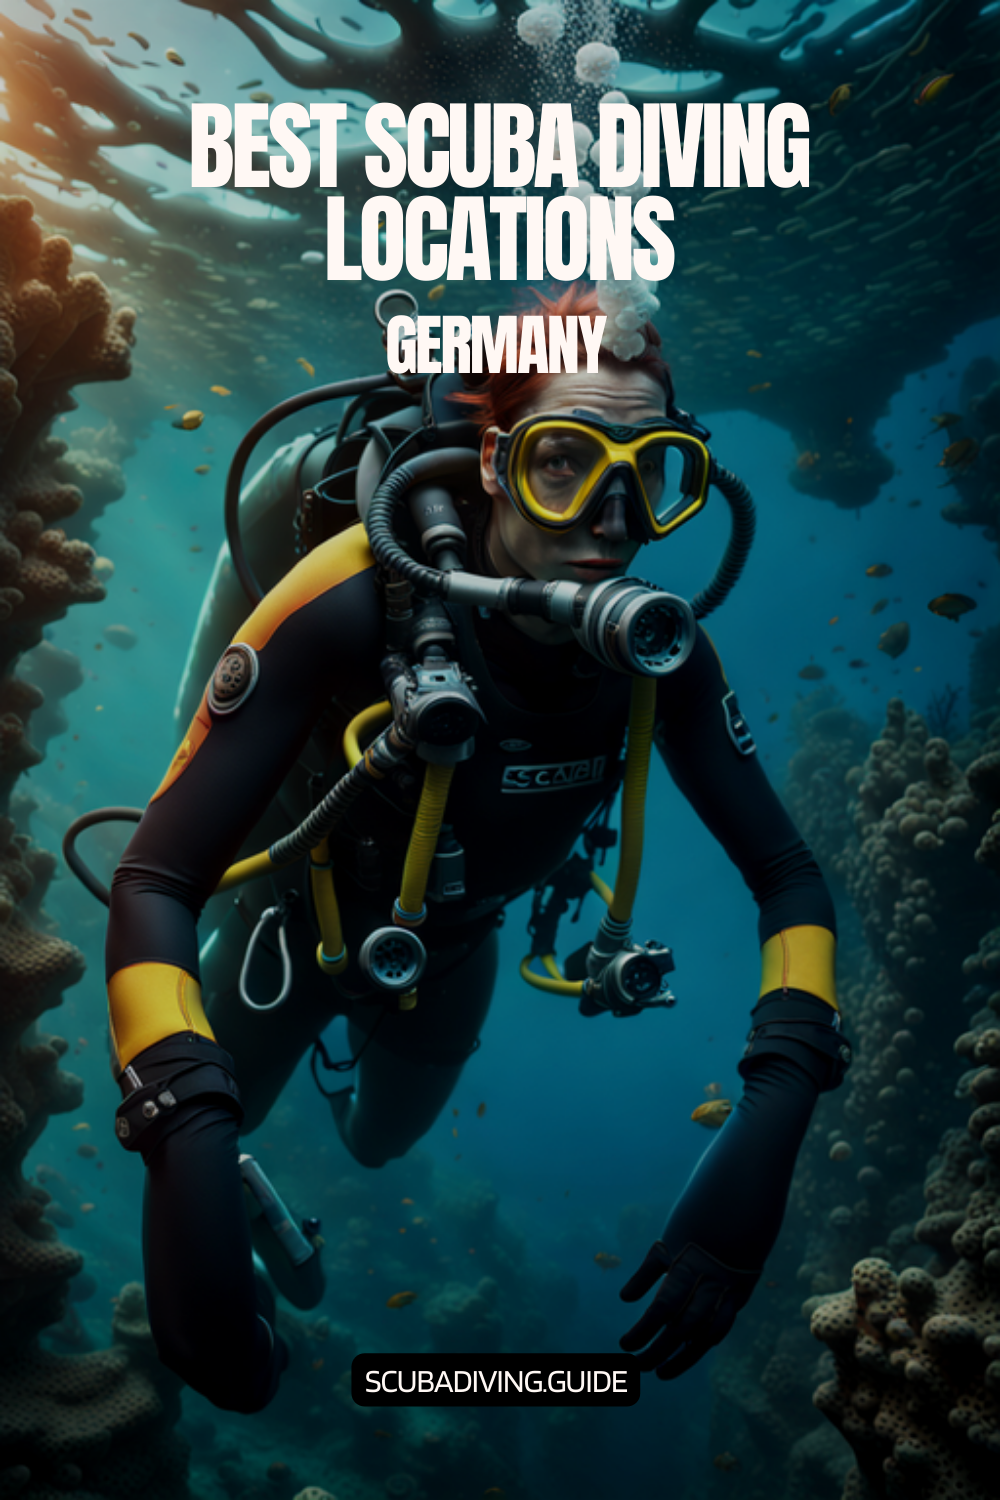 Scuba Diving Locations in Germany